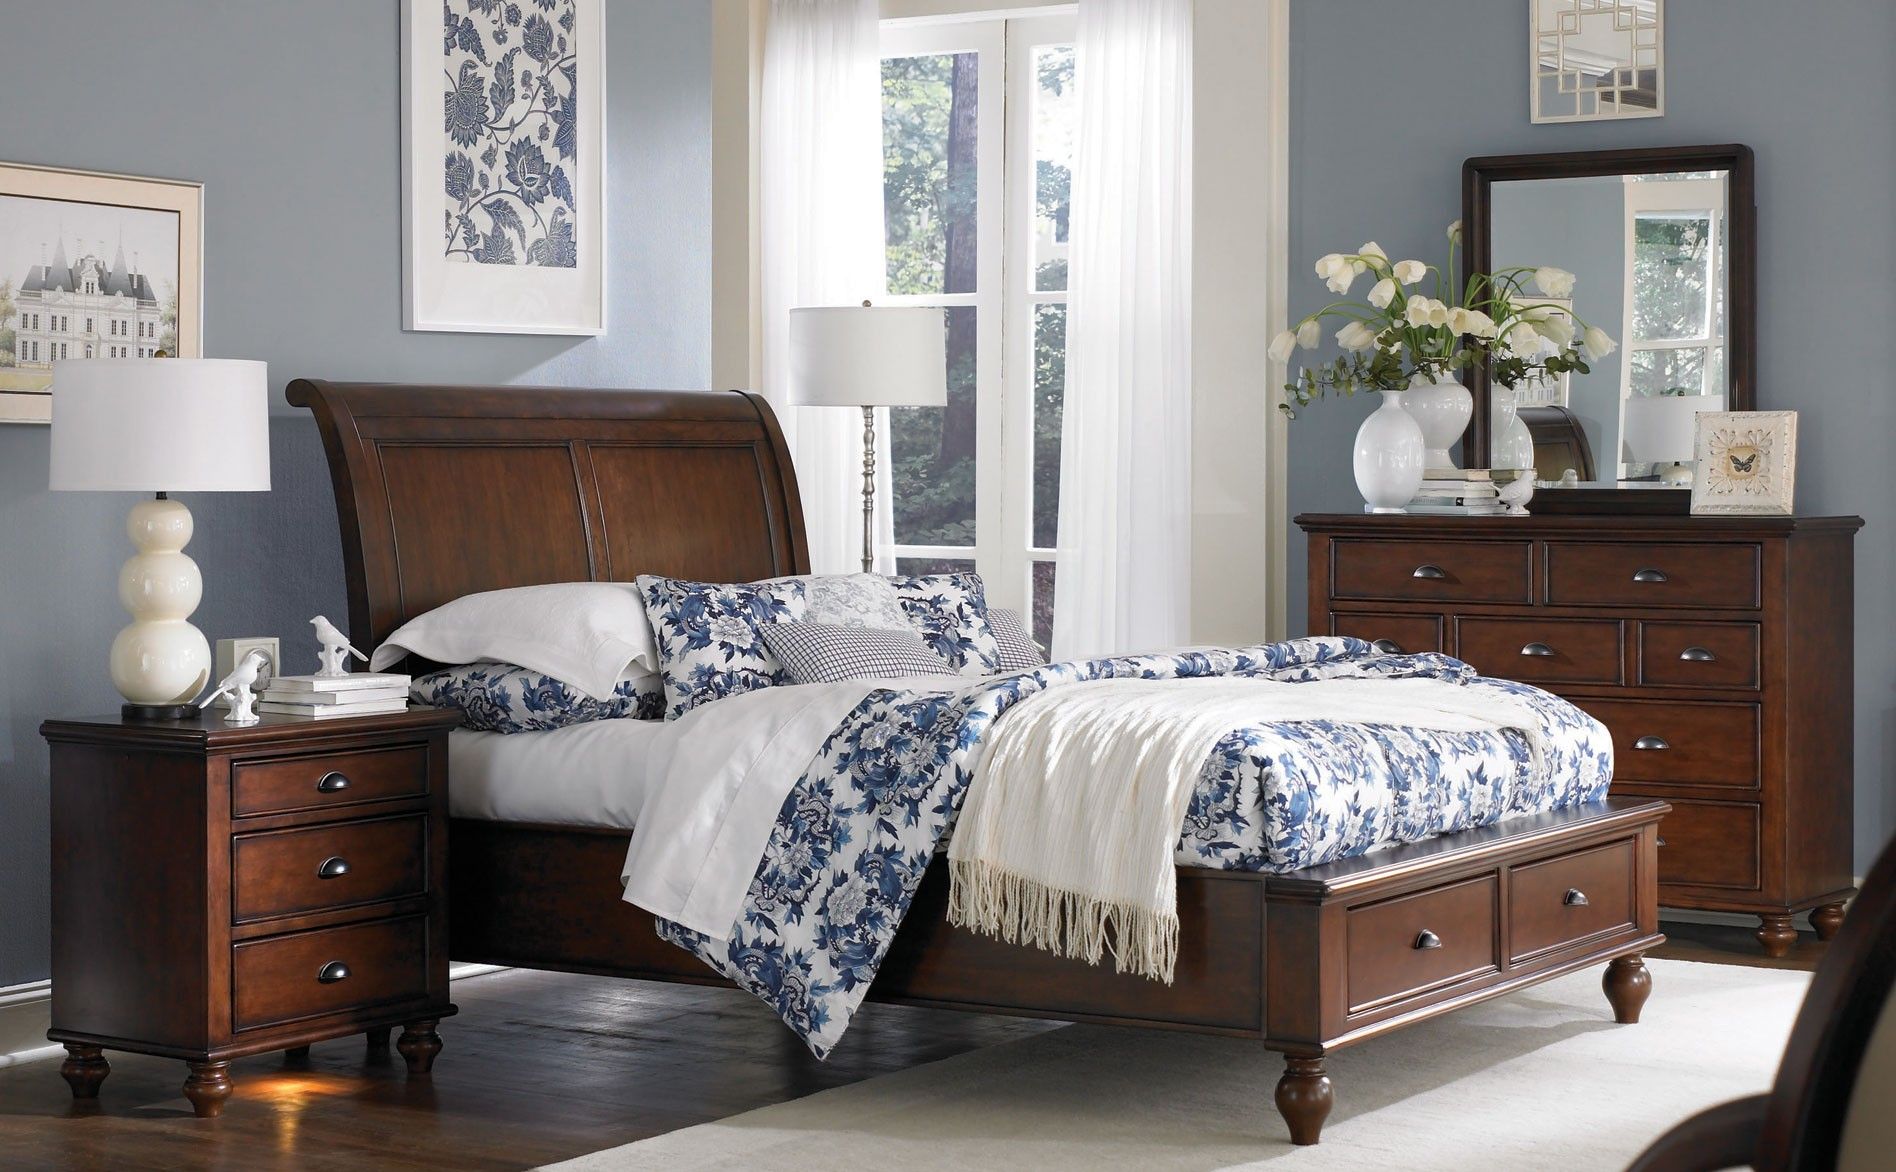 What Colors Go With Cherry Wood Bedroom Furniture